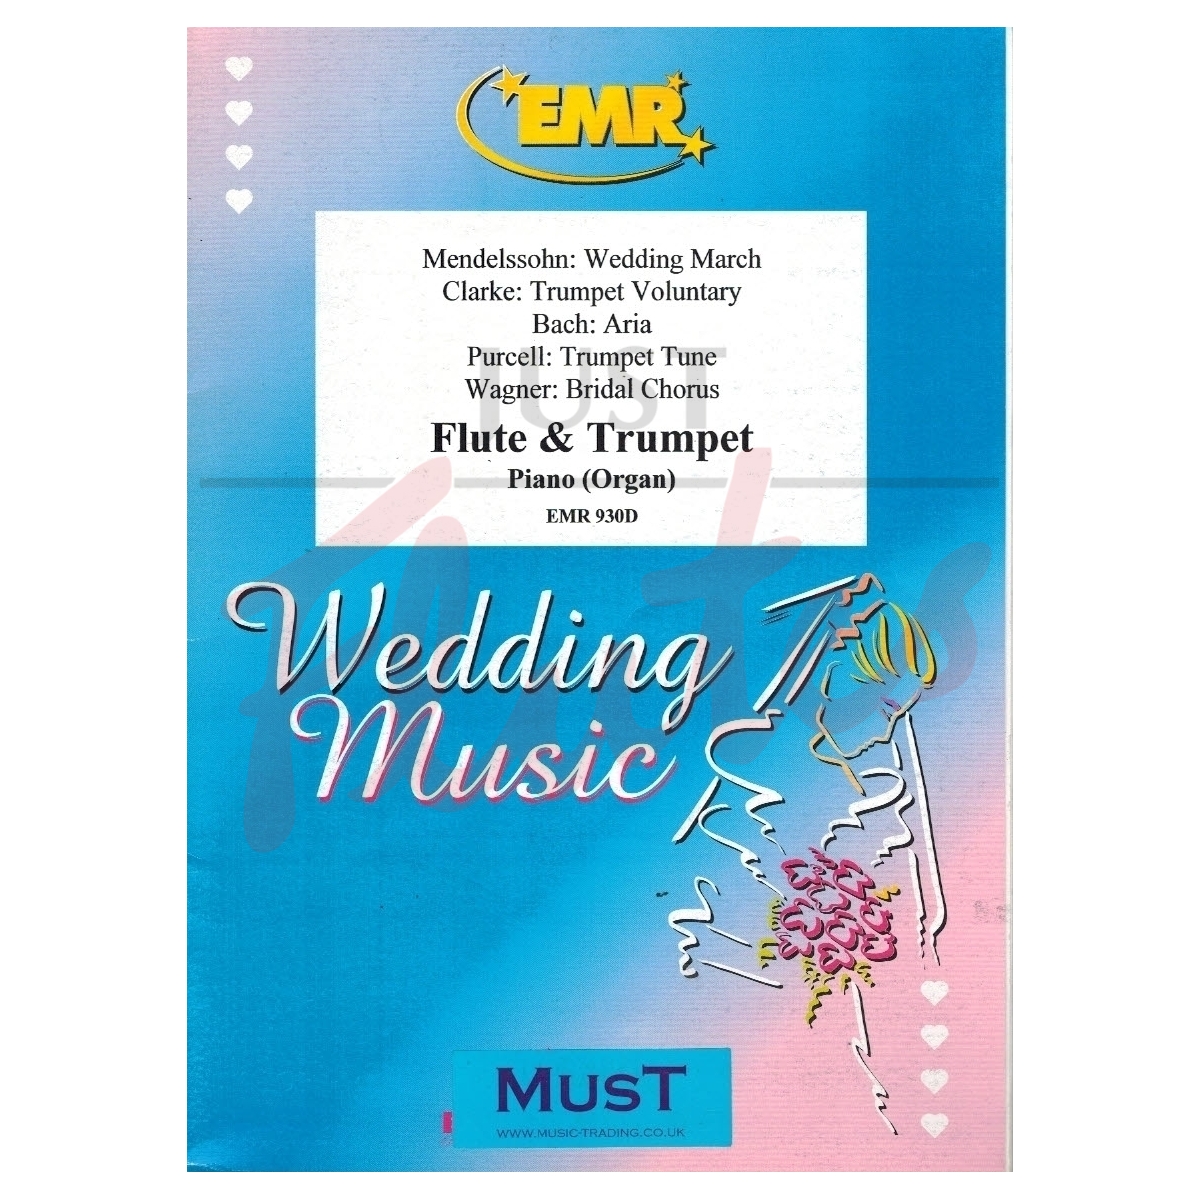 Wedding Music [Flute, Trumpet and Piano]